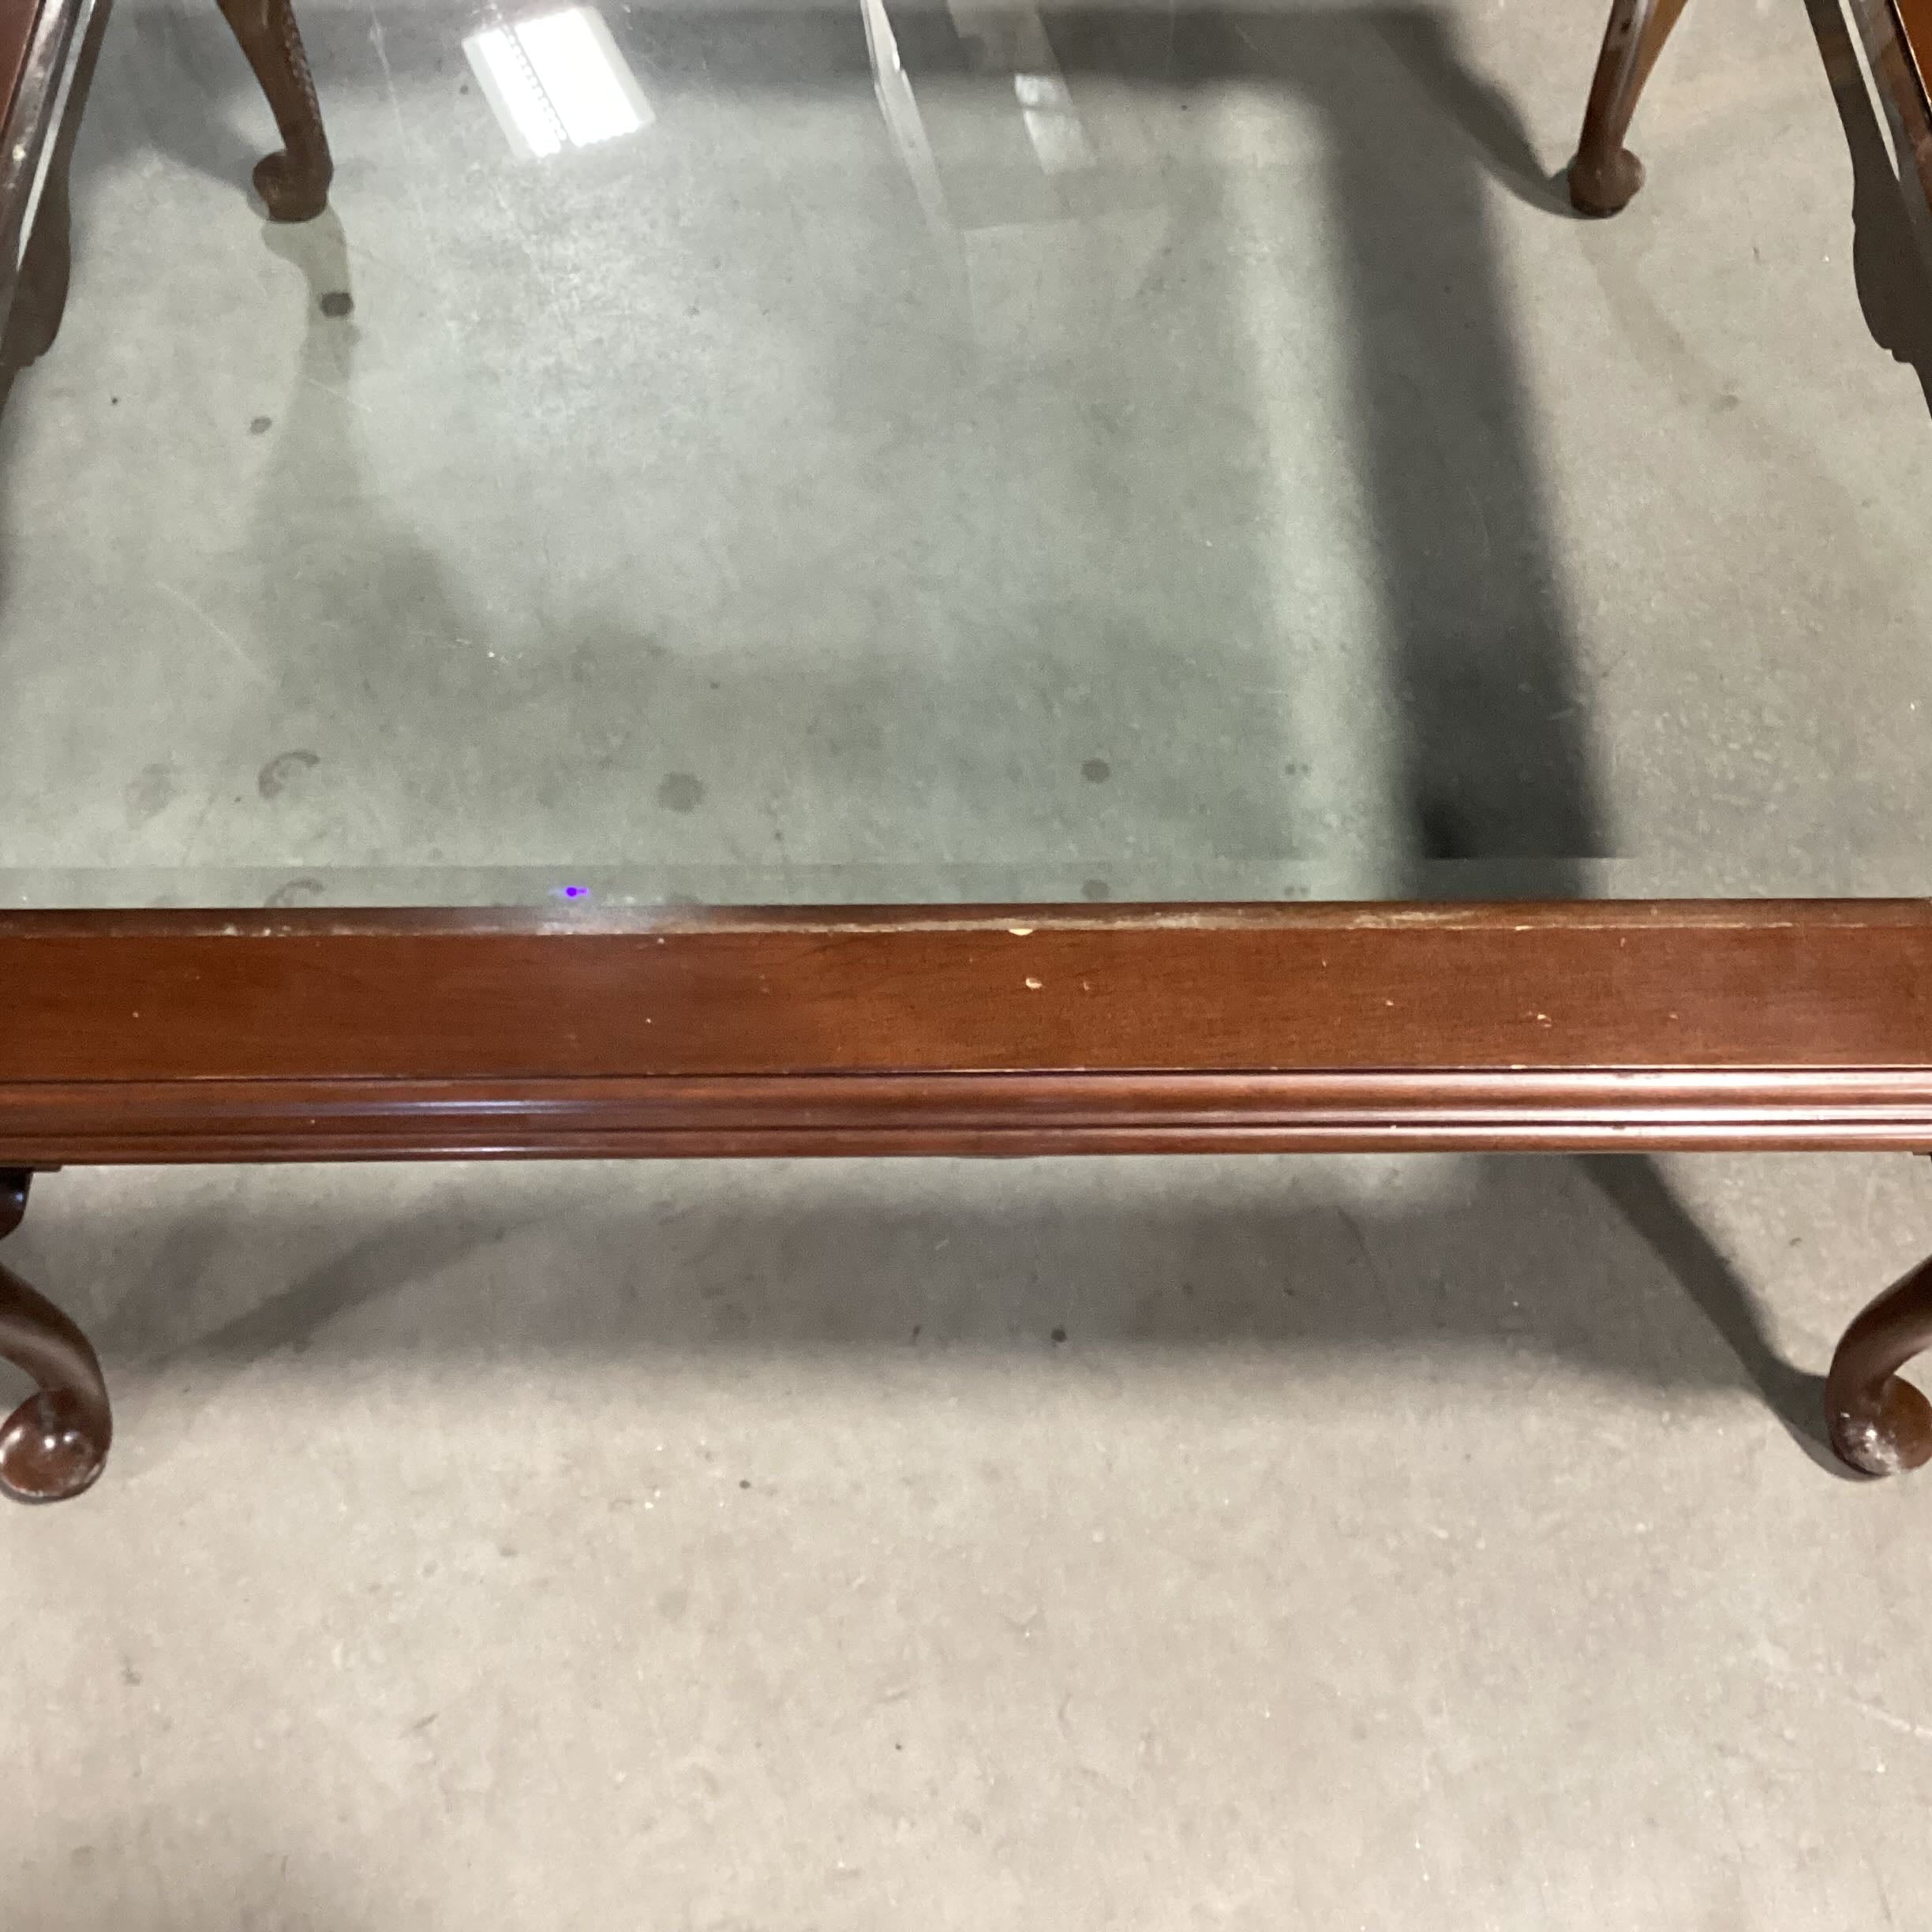 Square Wood Glass Inset Bowed Legs Coffee Table